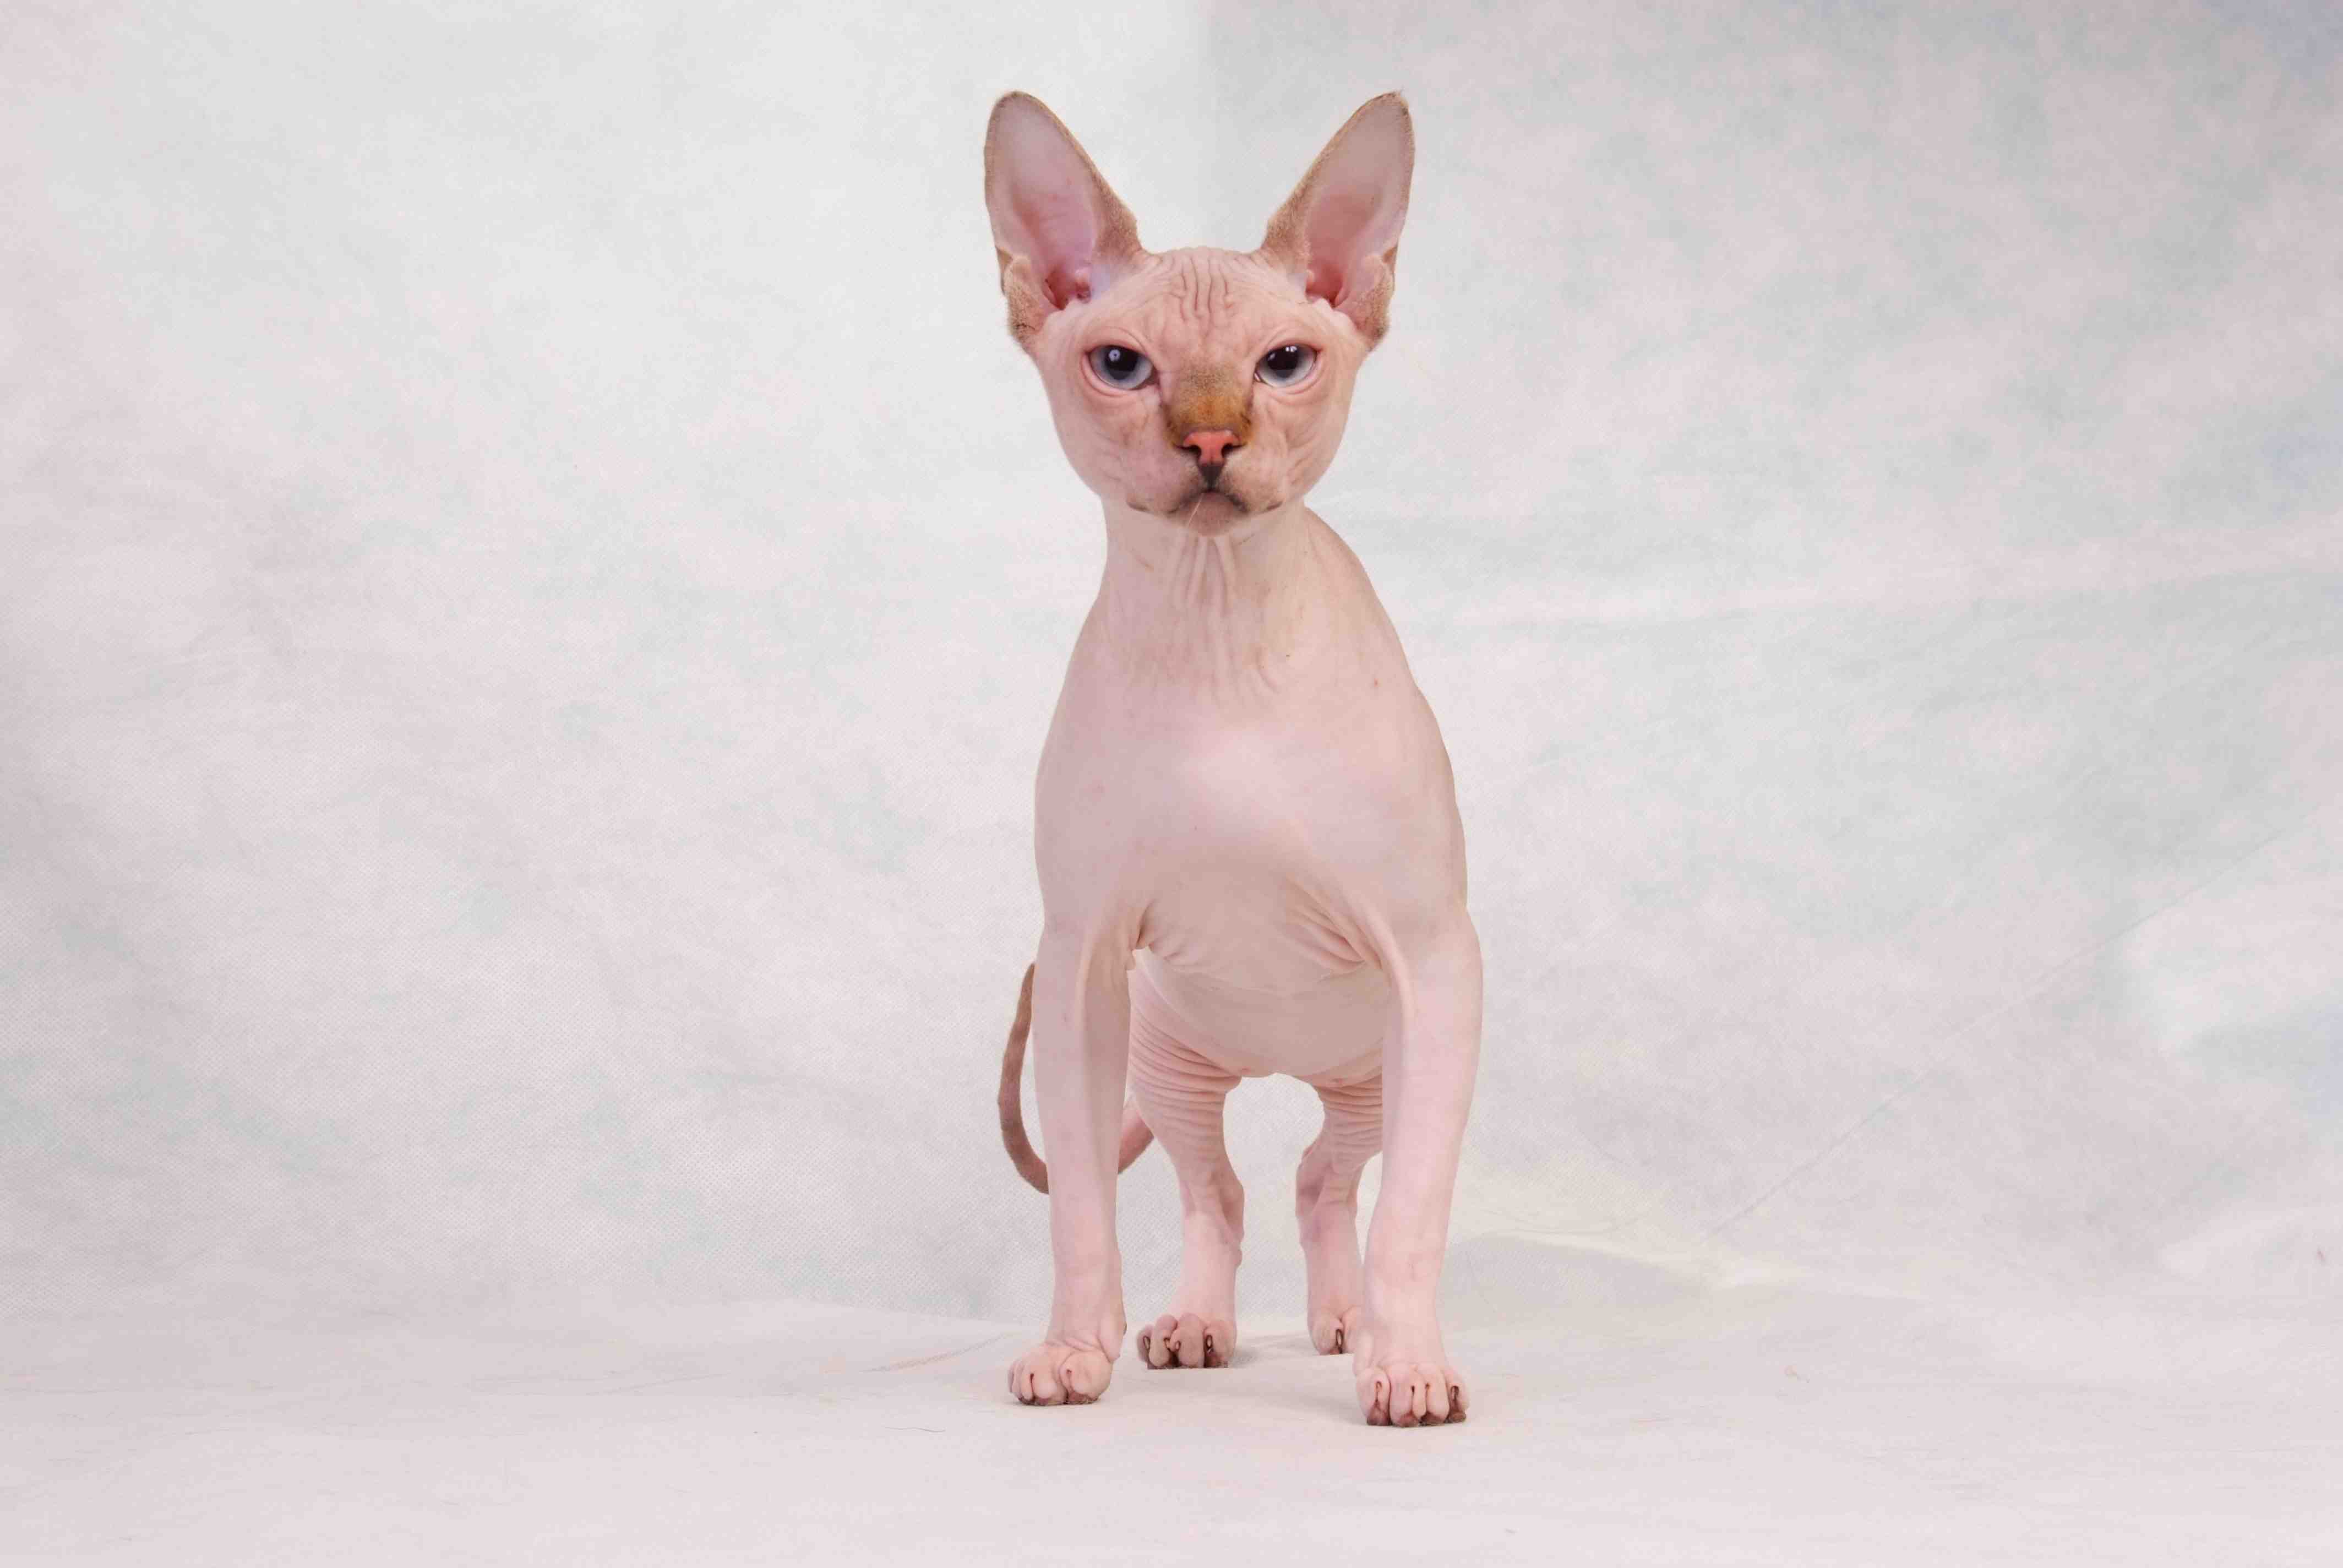 Sphynx cat with blue eyes posing on a white background wallpaper